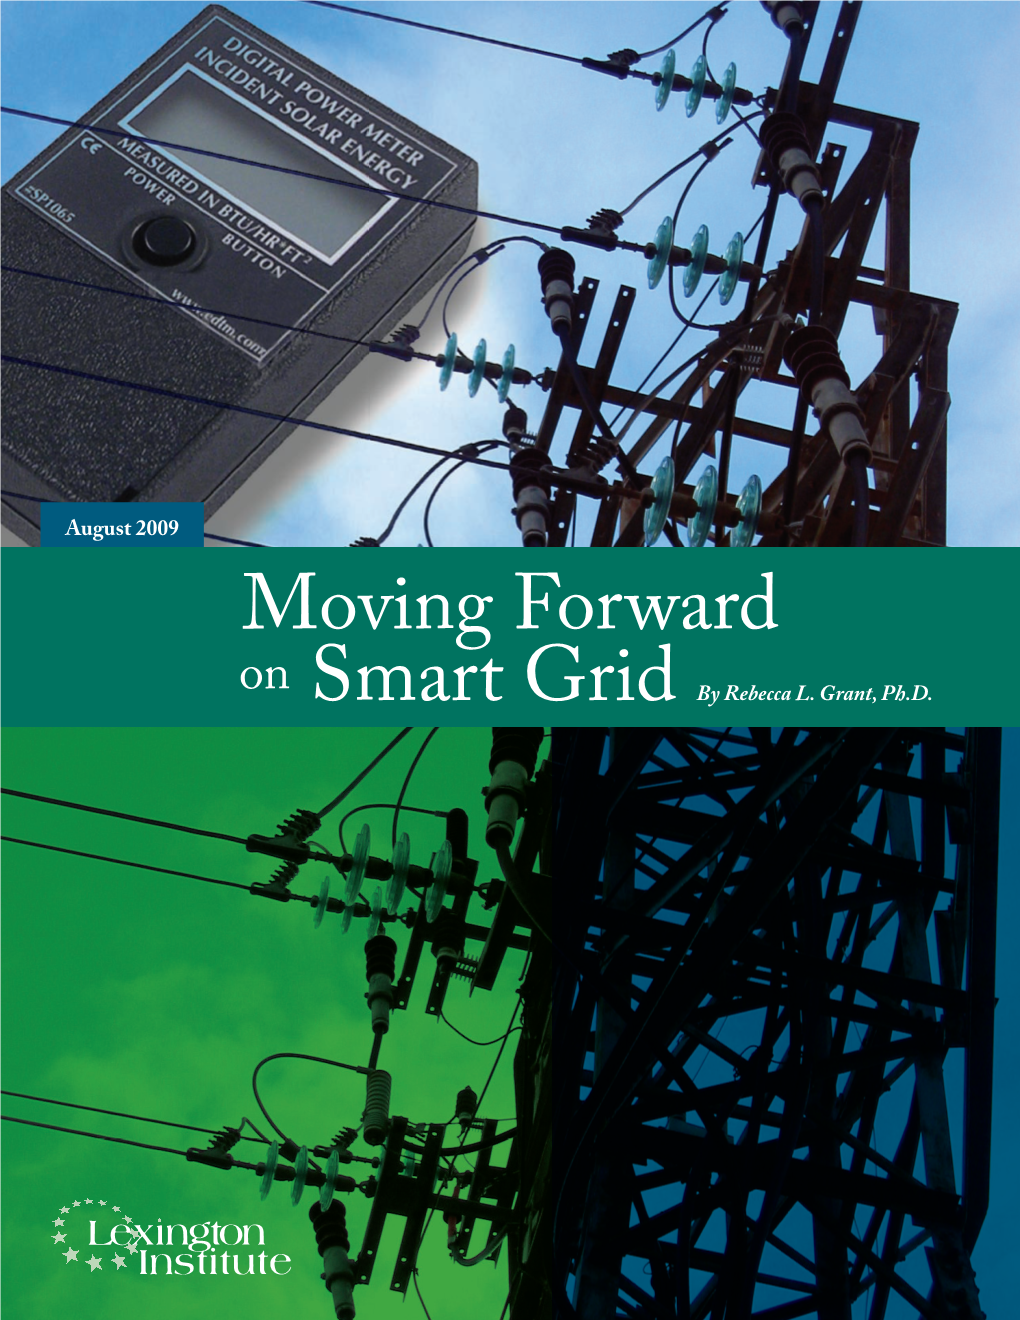 The Smart Grid to Take the Best Features of the Internet, Such As Open Standards and Easy Upgrades